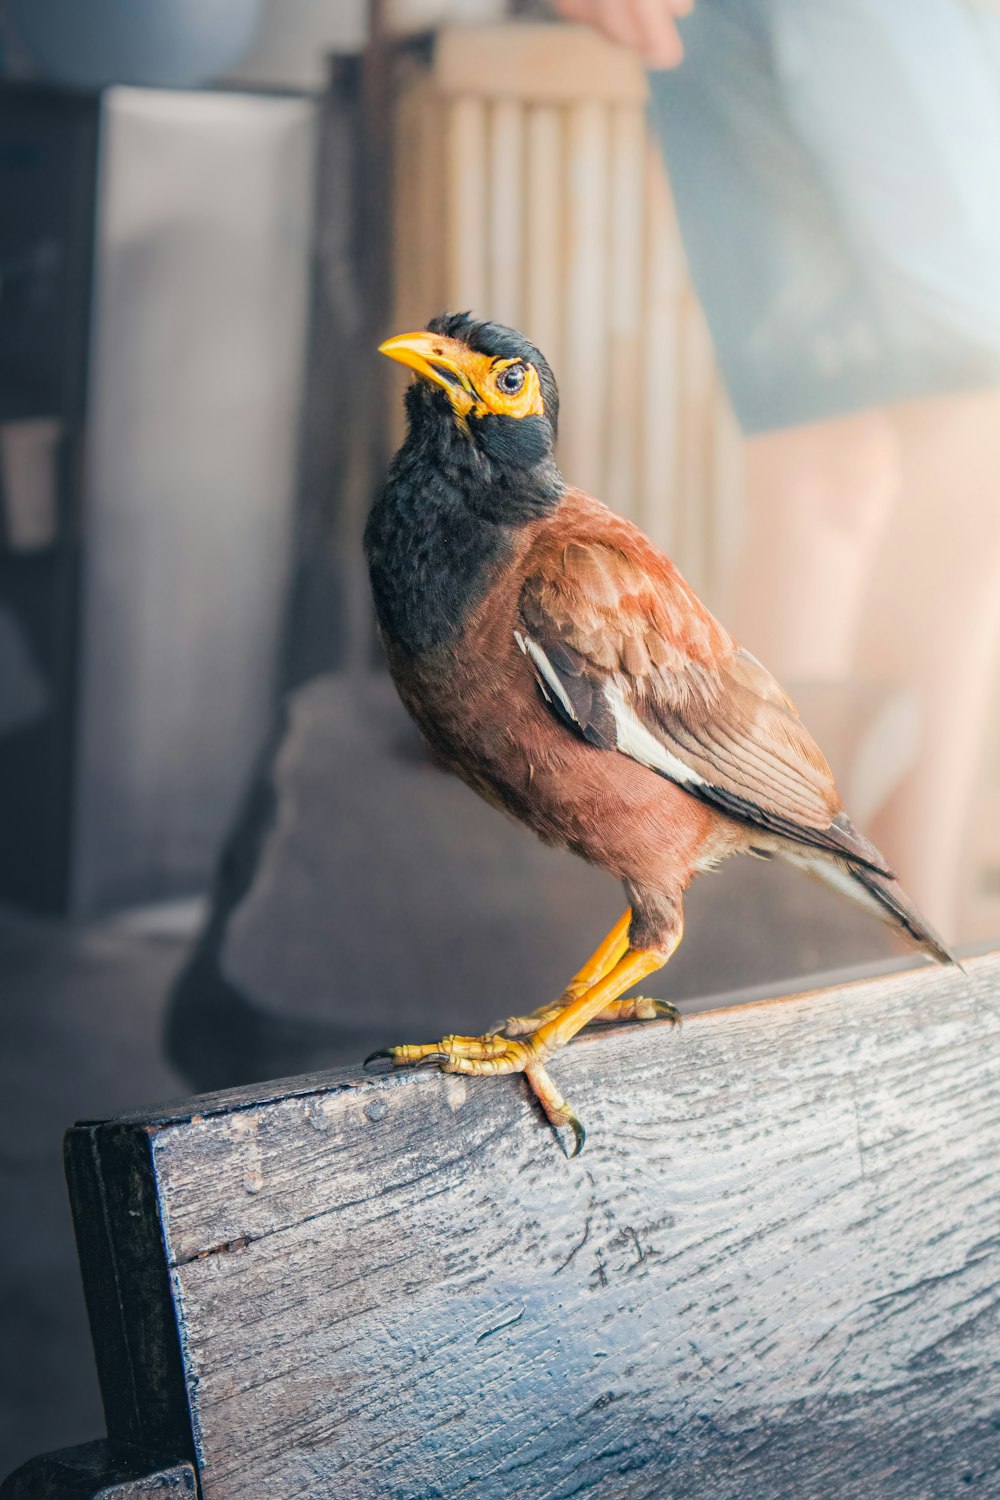 a small bird perched on a wooden bench